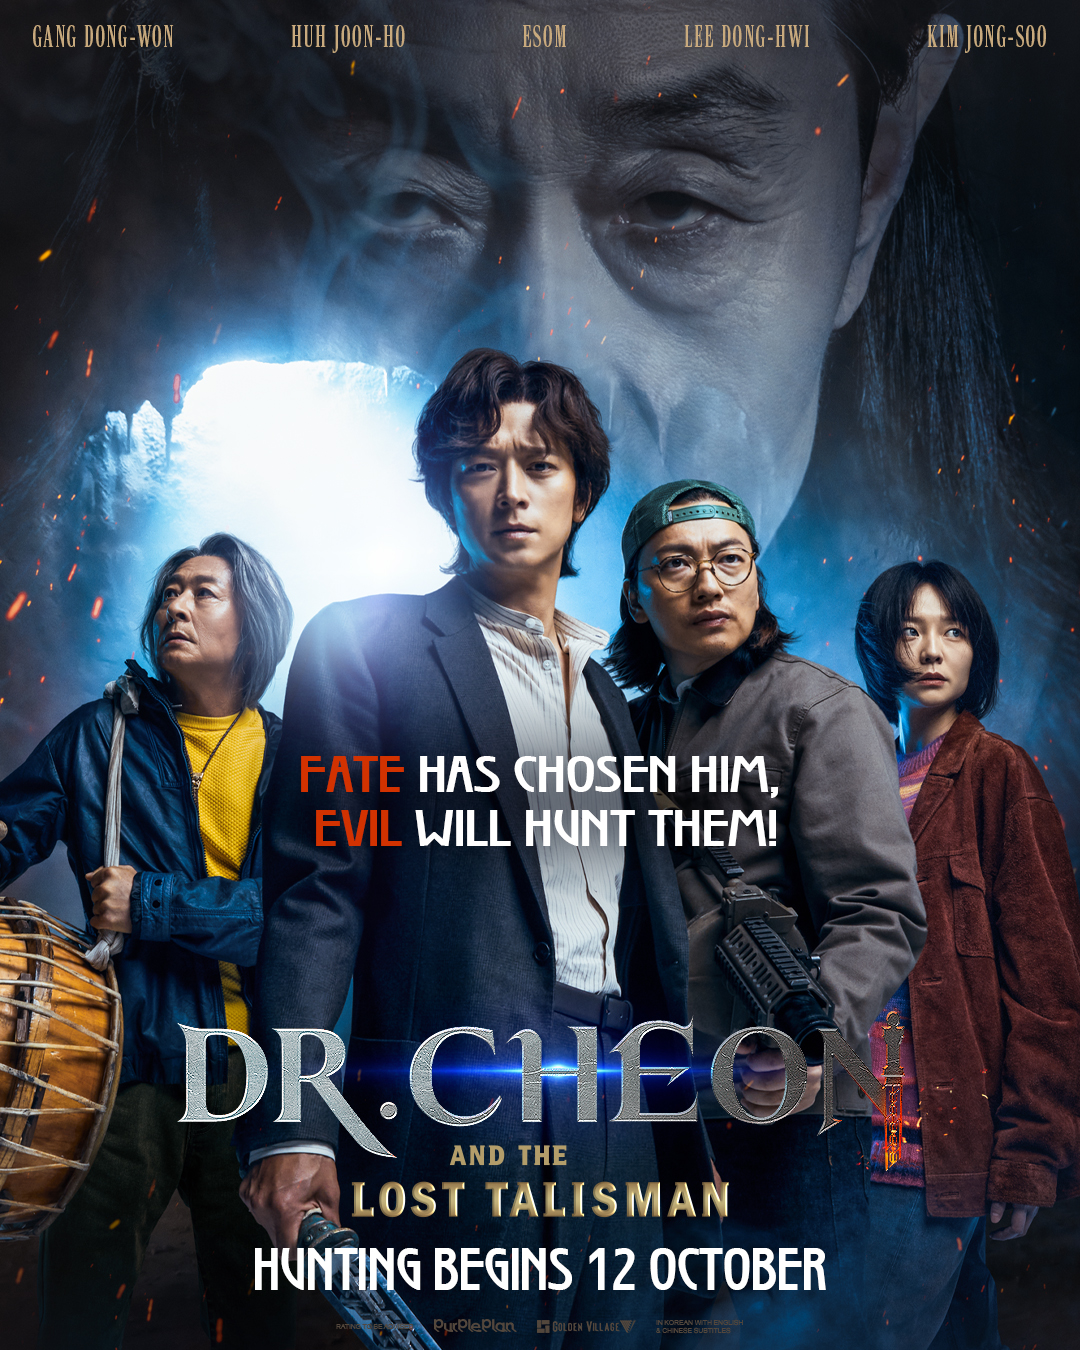 [FILM REVIEW] DR. CHEON AND THE LOST TALISMAN (2023) The Seoul Story